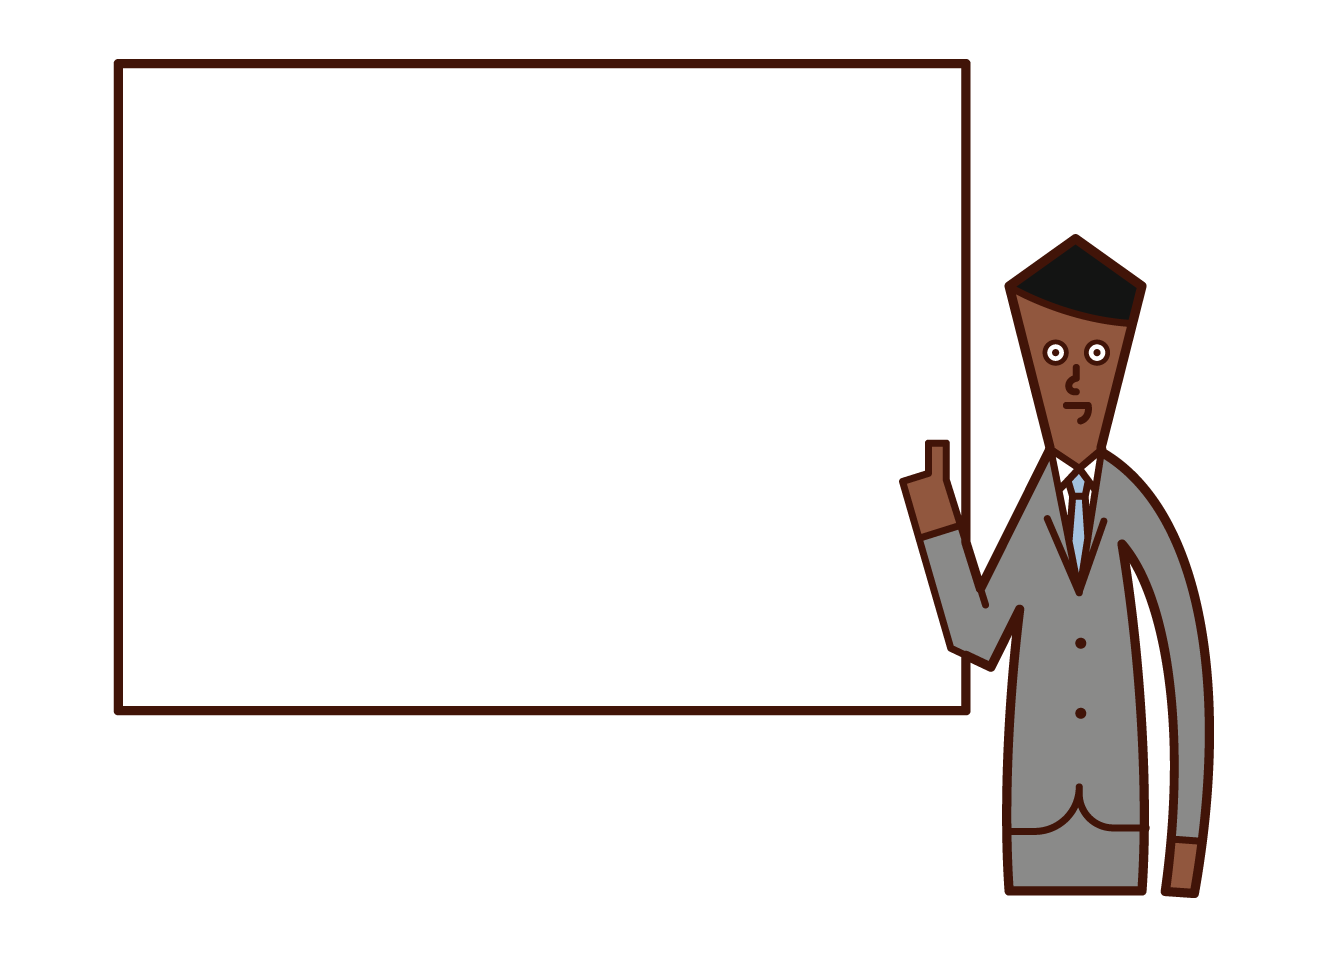 Illustrations of briefings and seminar lecturers (men)